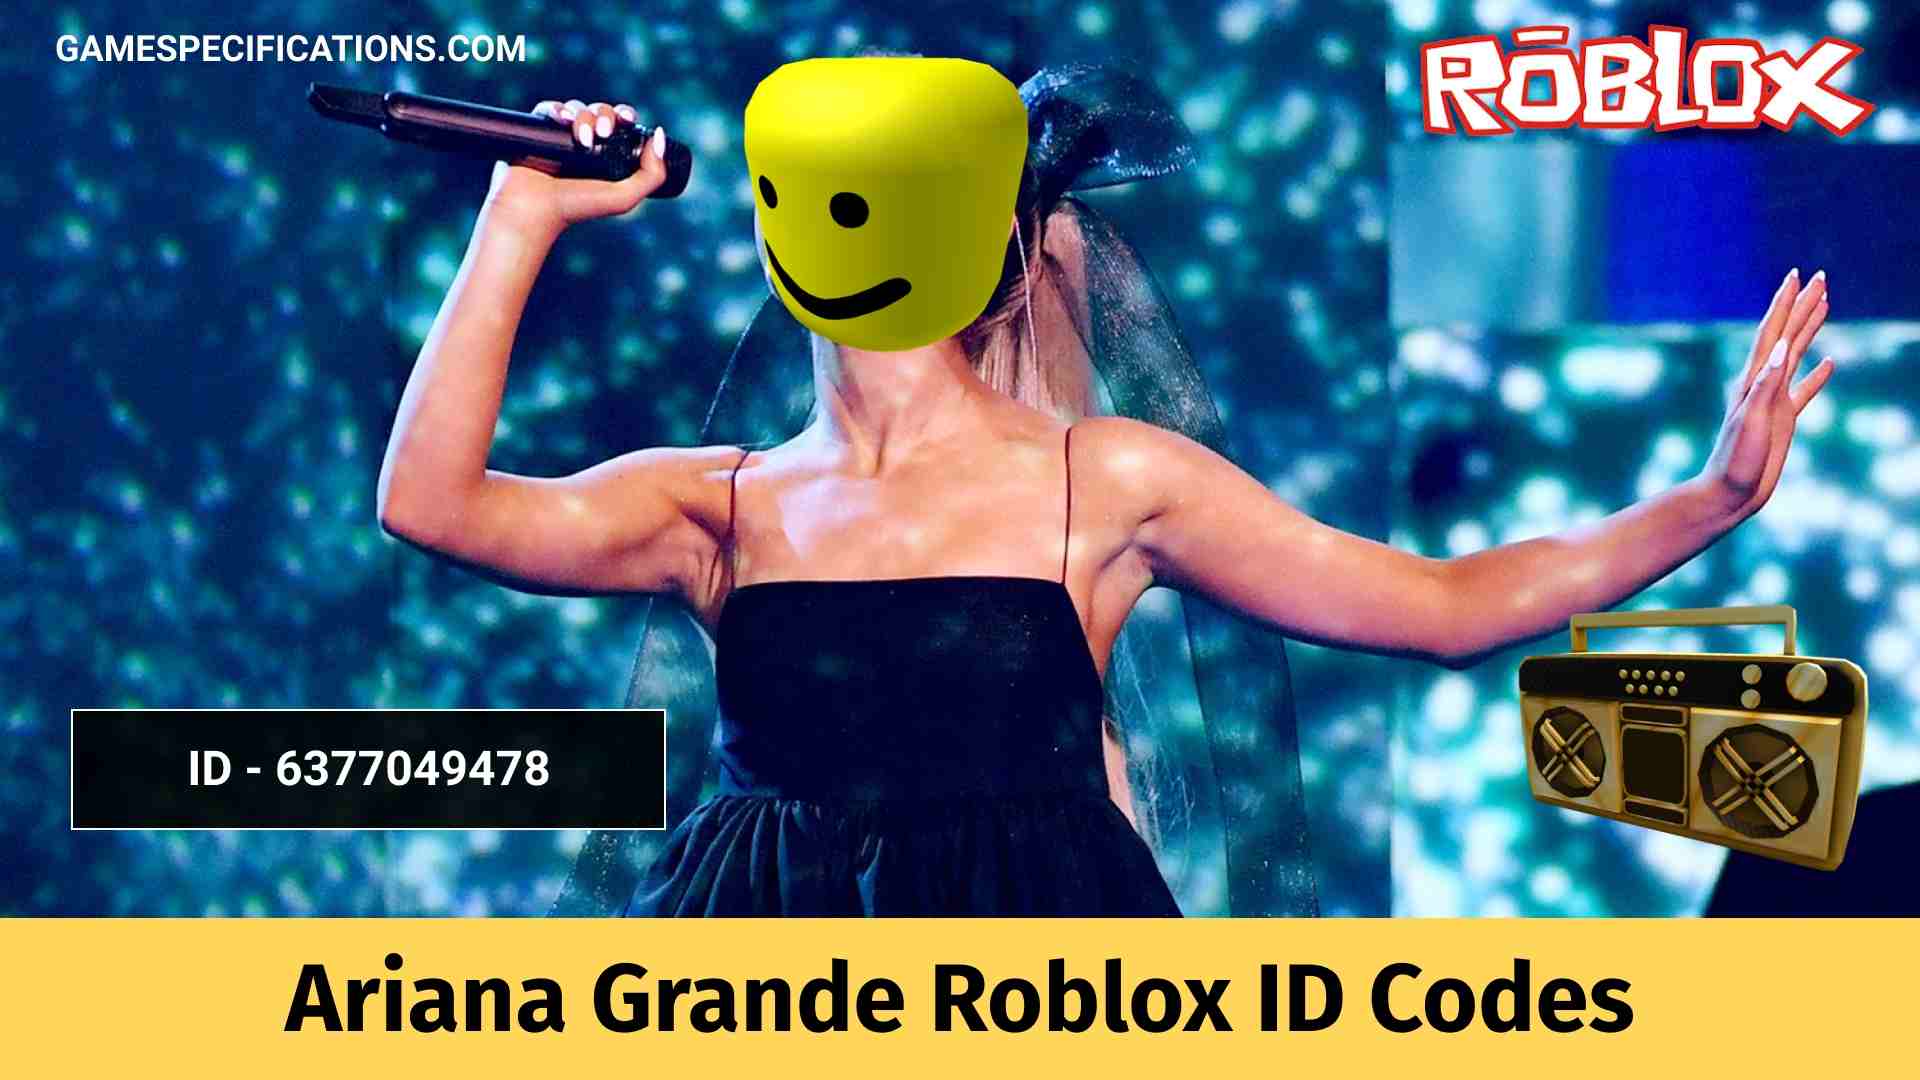 All Famous Ariana Grande Roblox Id Codes 2021 Game Specifications - 16 shots roblox id full